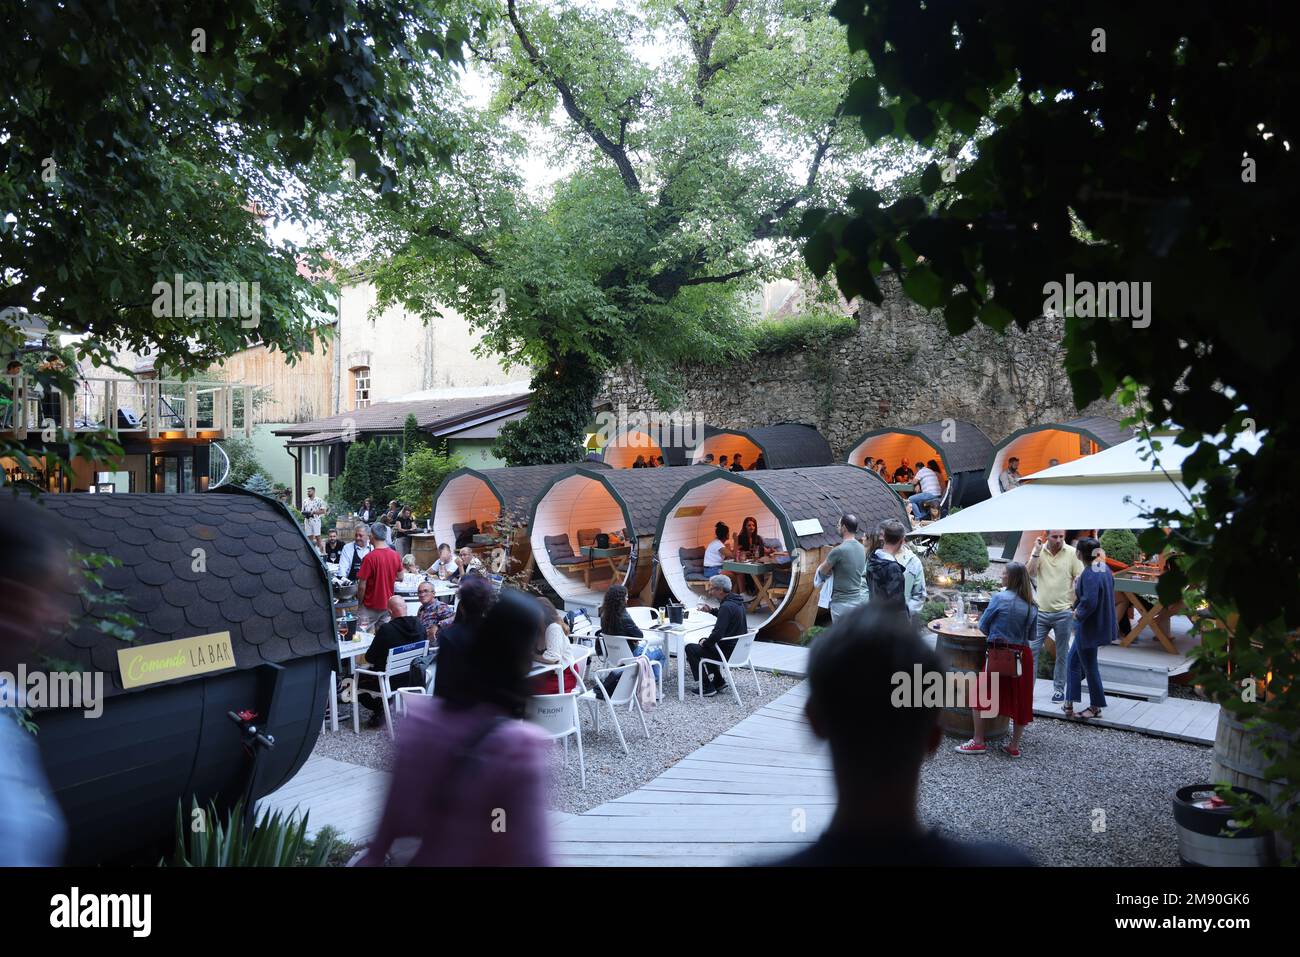 Guests sitting in cylindrical tubes covered w/ roof tiles outside a cafe restaurant (Comanda La Bar);they are dry and can eat & drink even if it rains Stock Photo